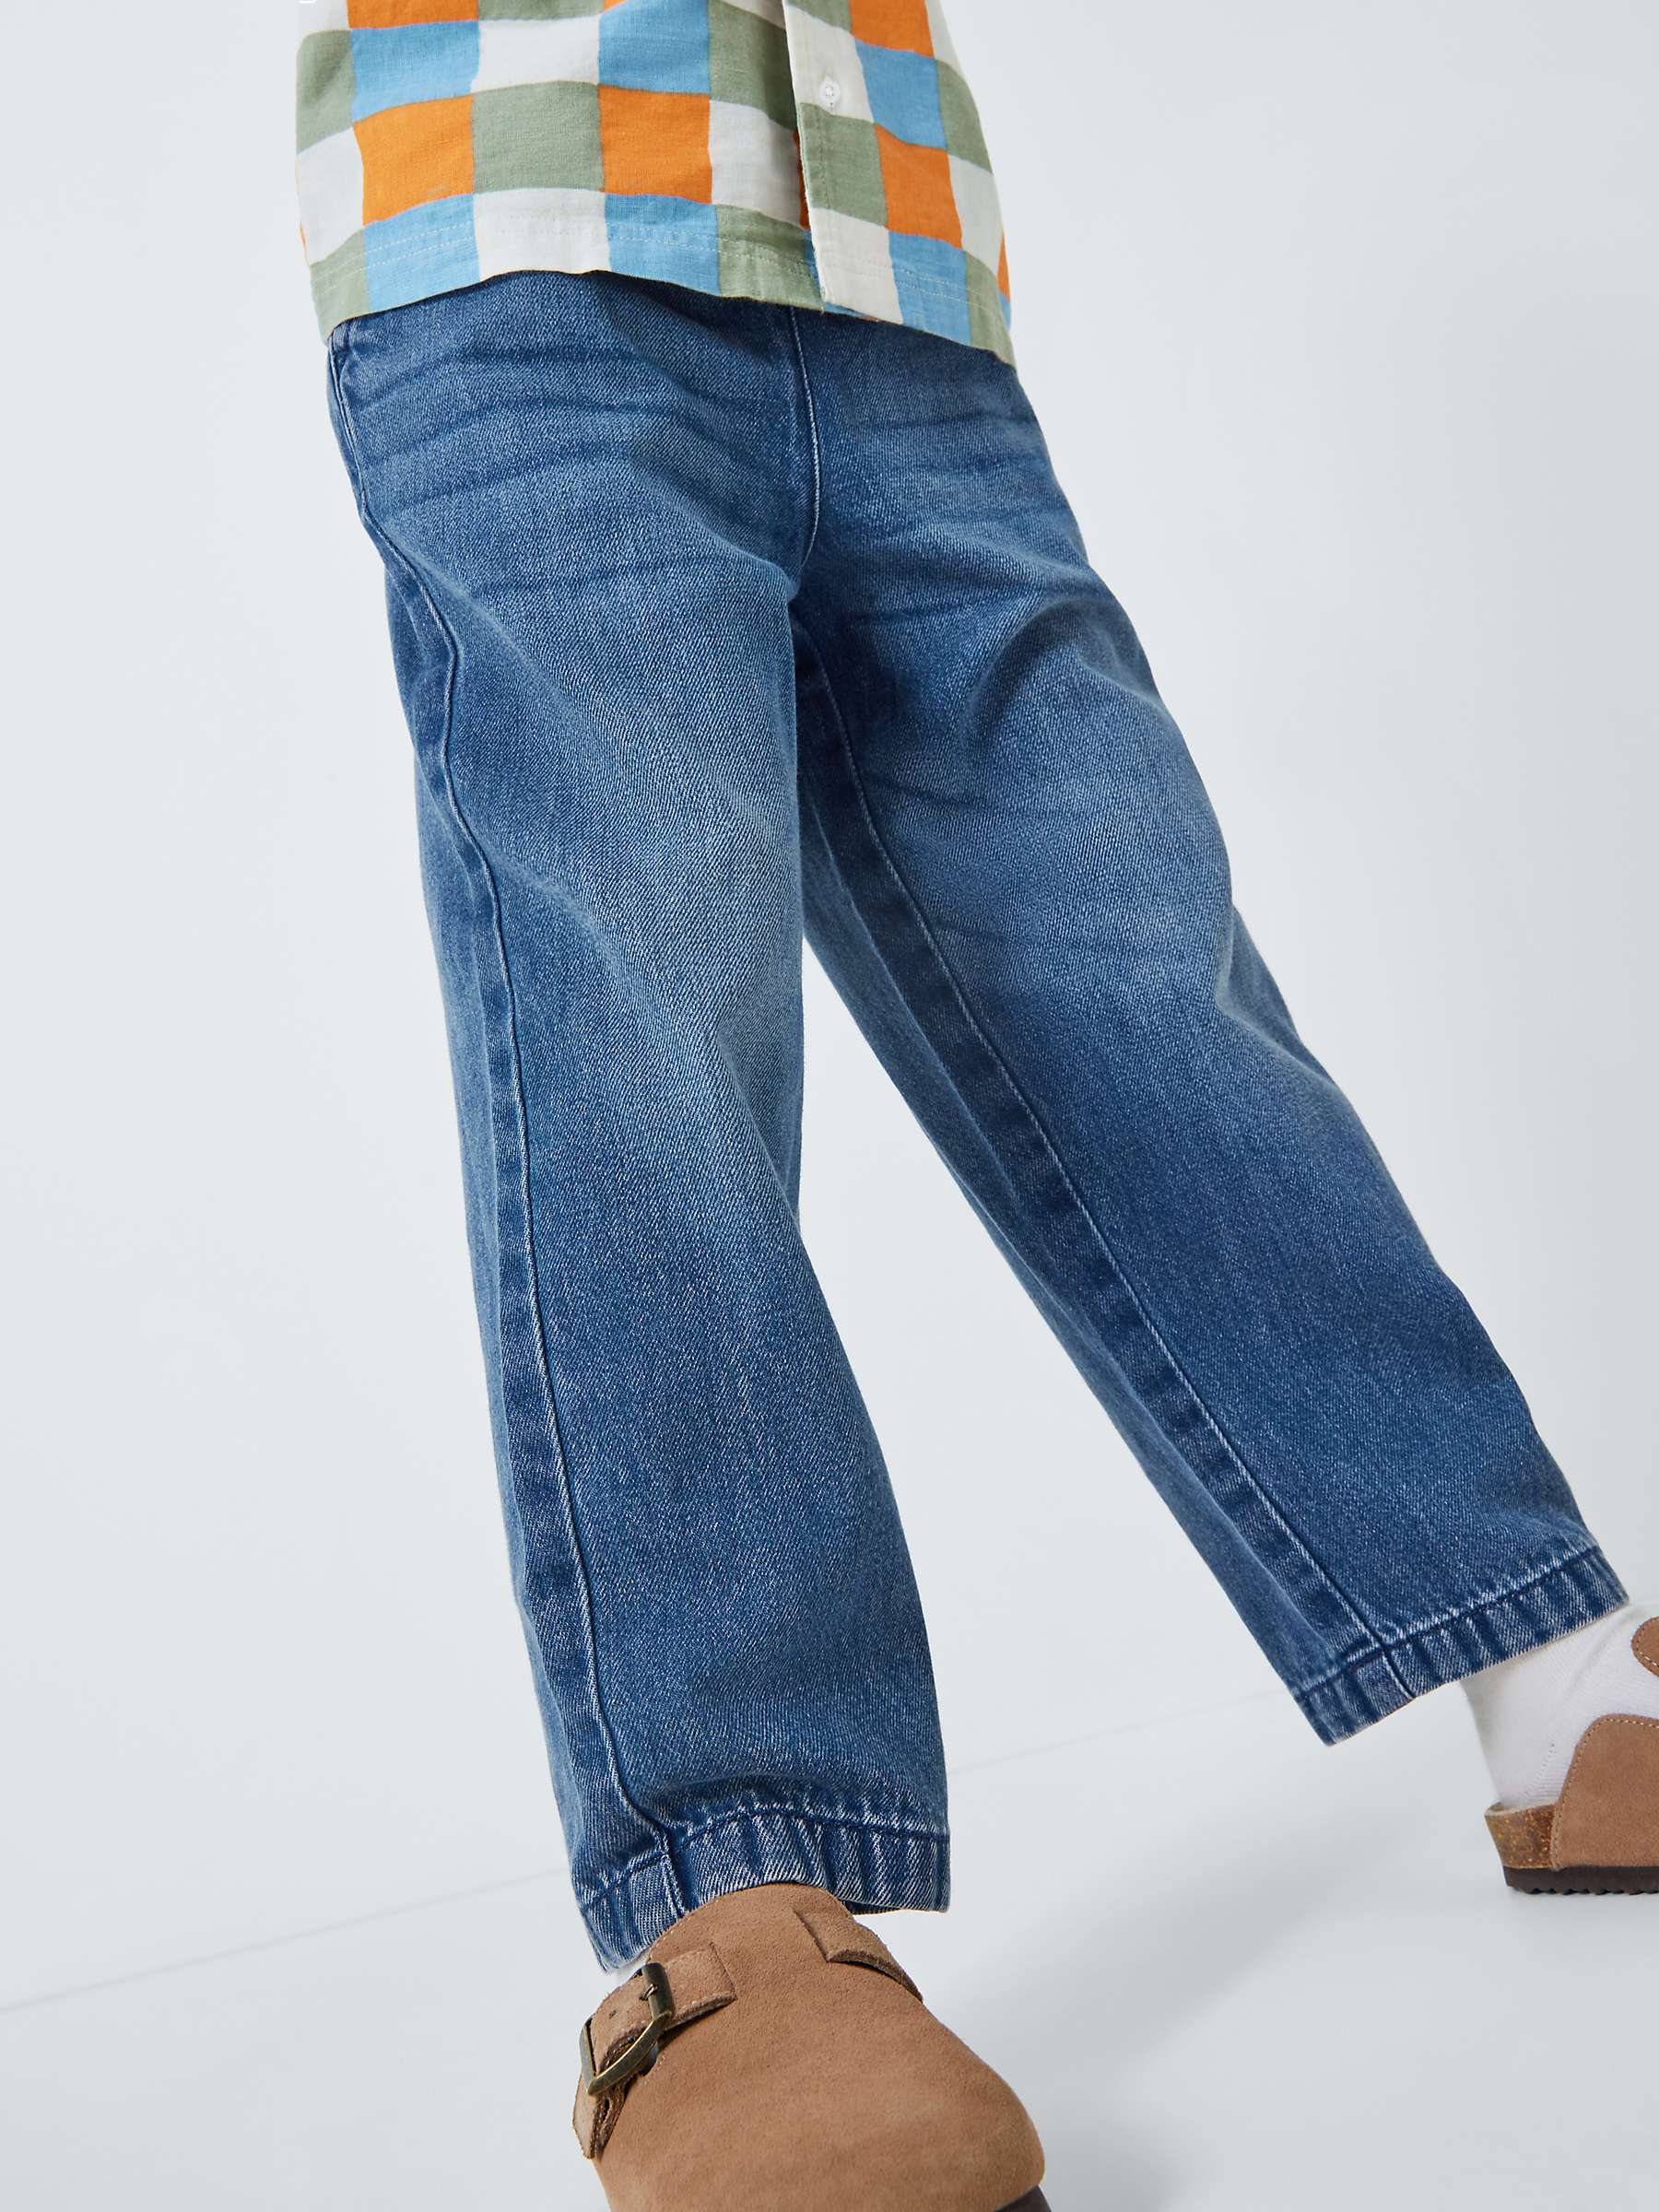 Buy John Lewis ANYDAY Boy's Denim Pull-On Trousers, Blue Online at johnlewis.com